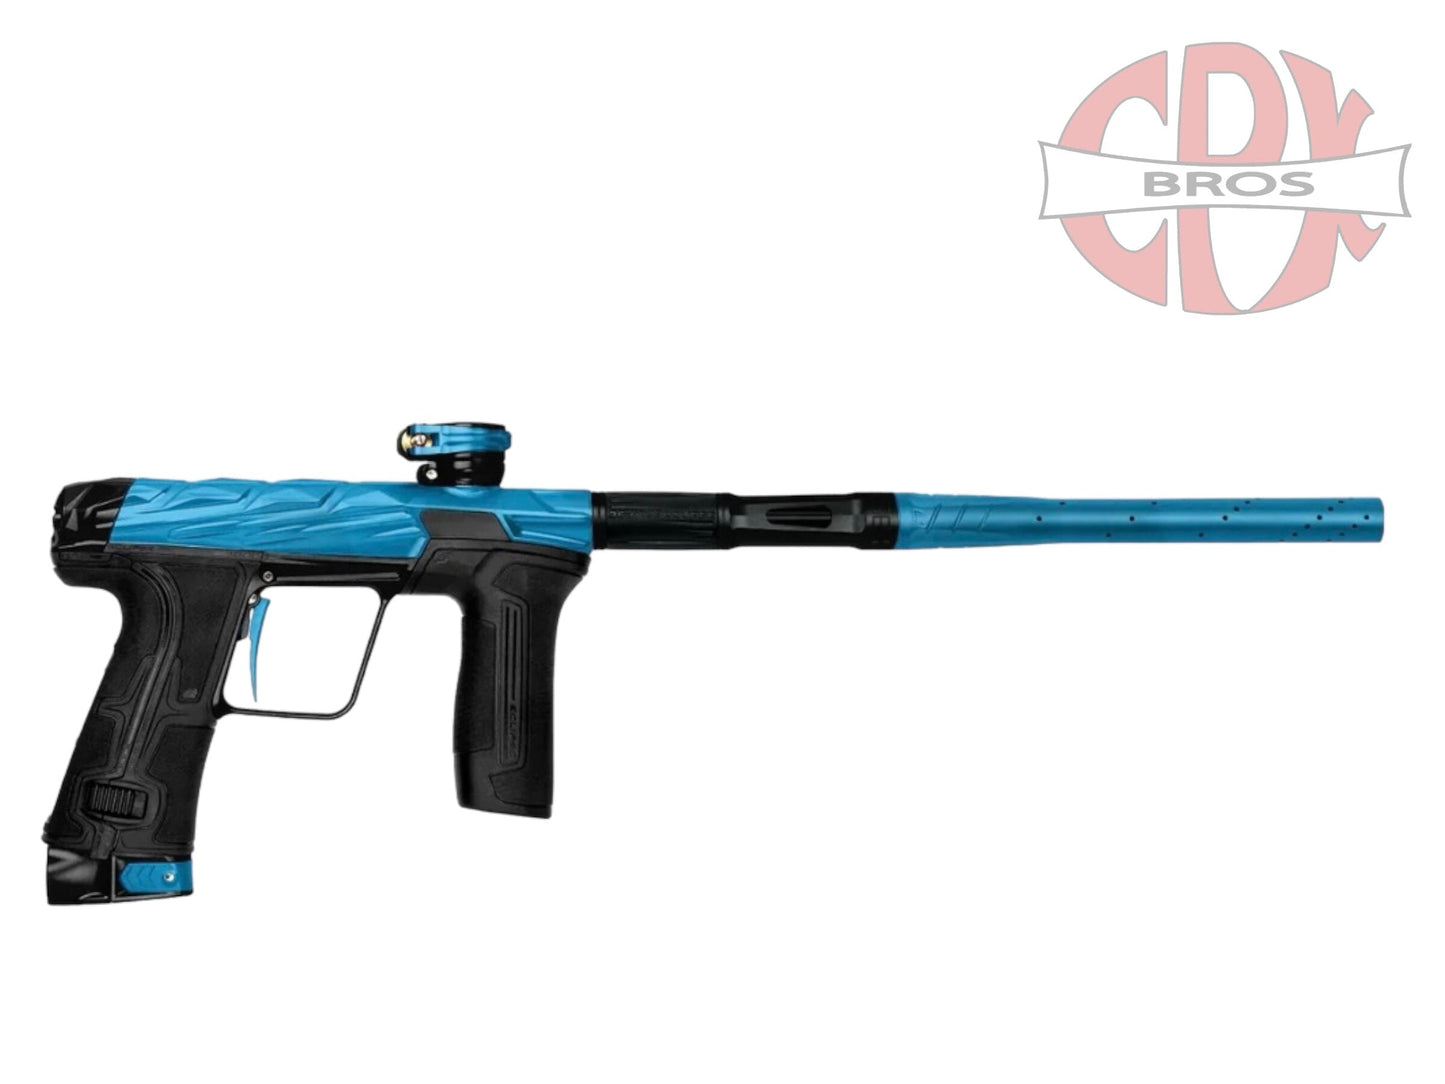 Used NEW PLANET ECLIPSE CS3 - INFAMOUS EDITION BLUE/BLACK Paintball Gun from CPXBrosPaintball Buy/Sell/Trade Paintball Markers, New Paintball Guns, Paintball Hoppers, Paintball Masks, and Hormesis Headbands